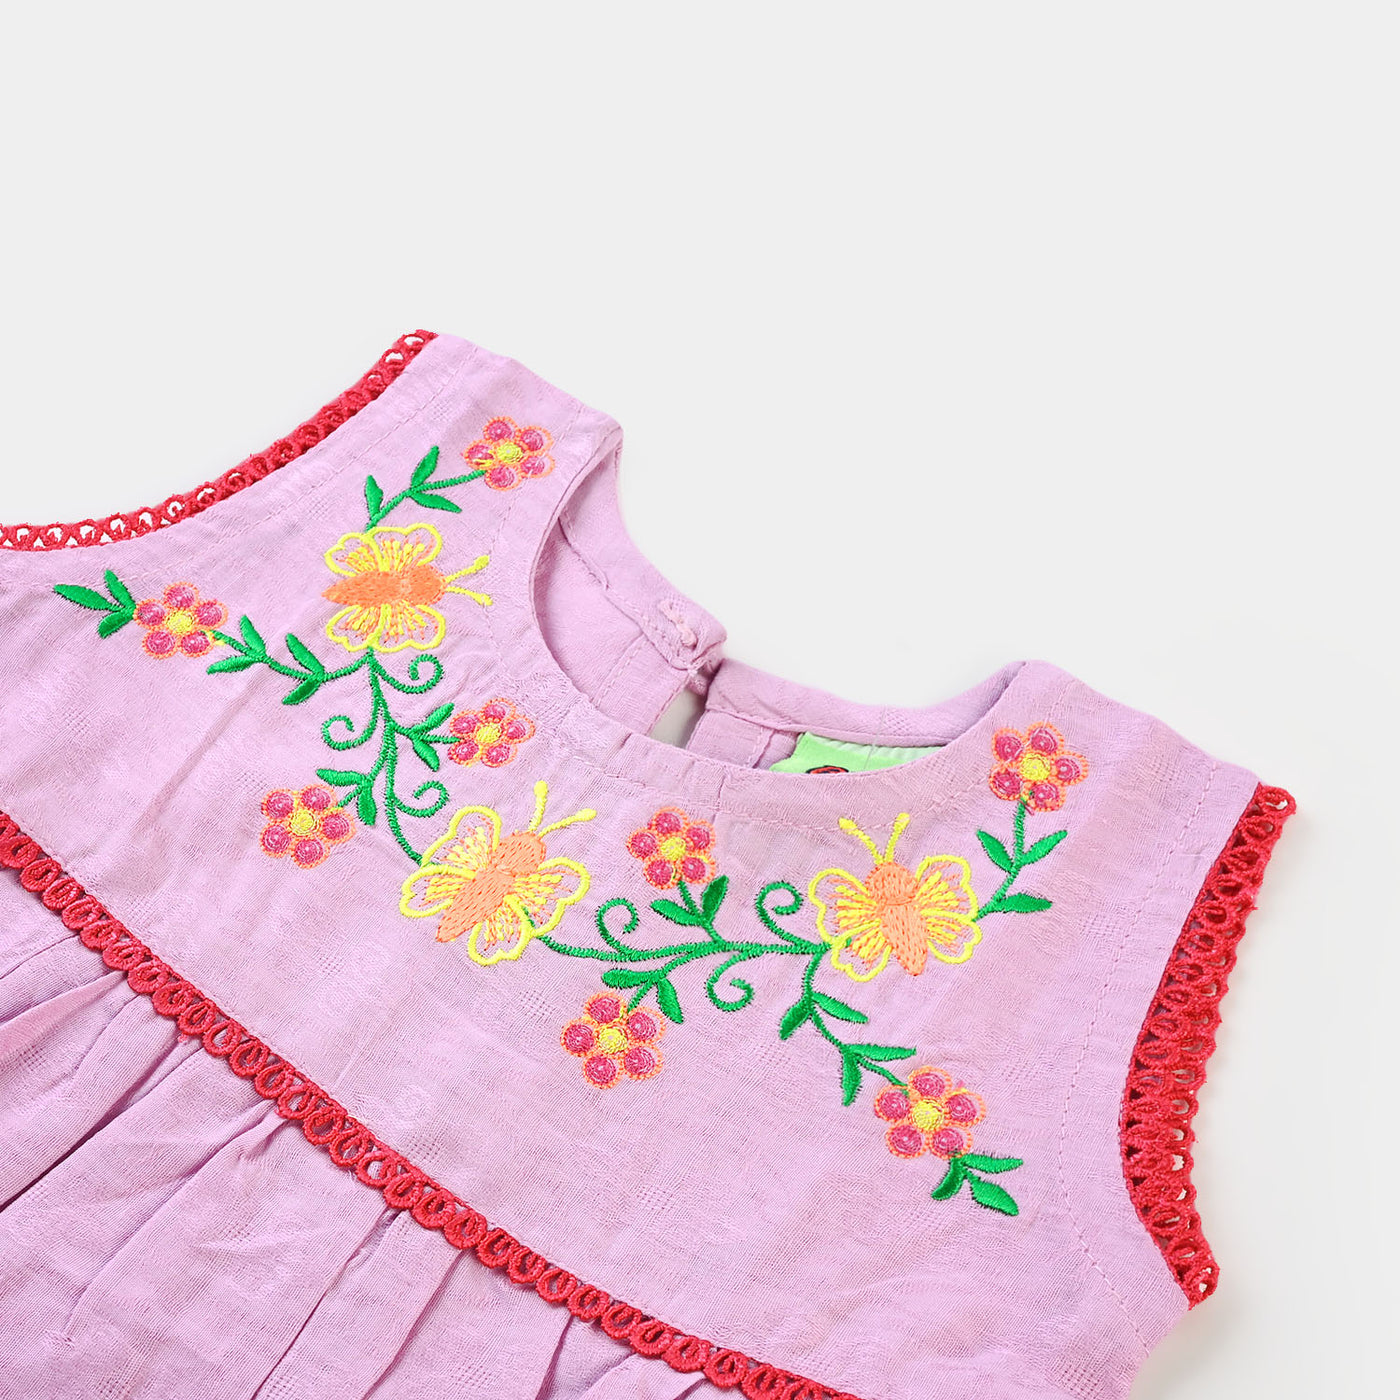 Infant Girls Jacquard Embroidery Top My Garden - Lylac